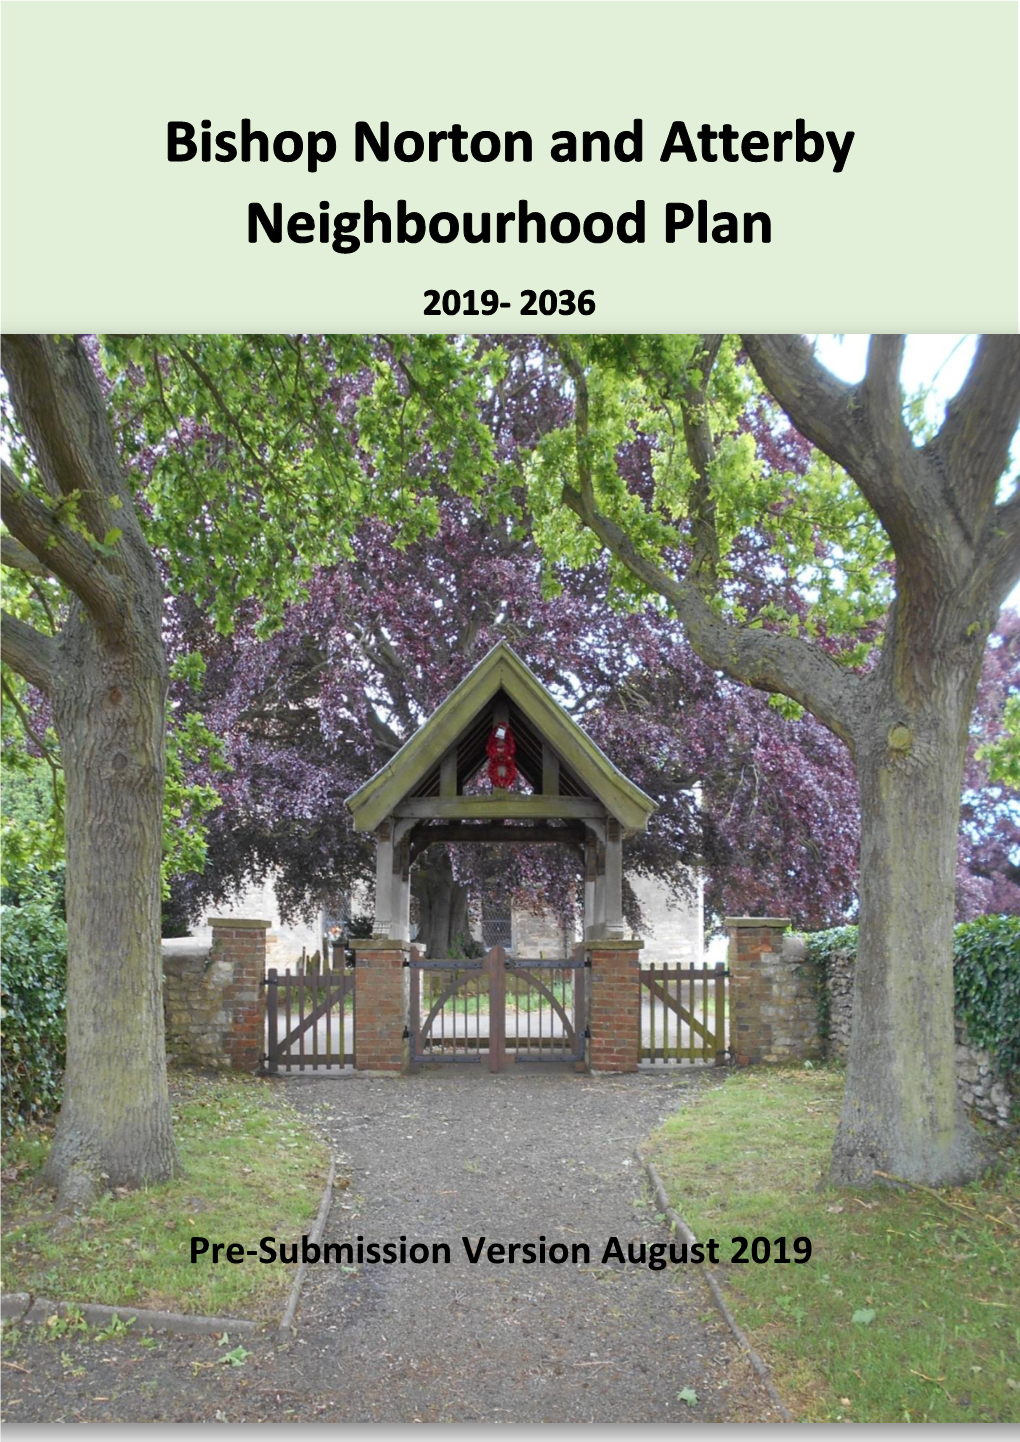 Bishop Norton with Atterby Pre-Submission Neighbourhood Plan